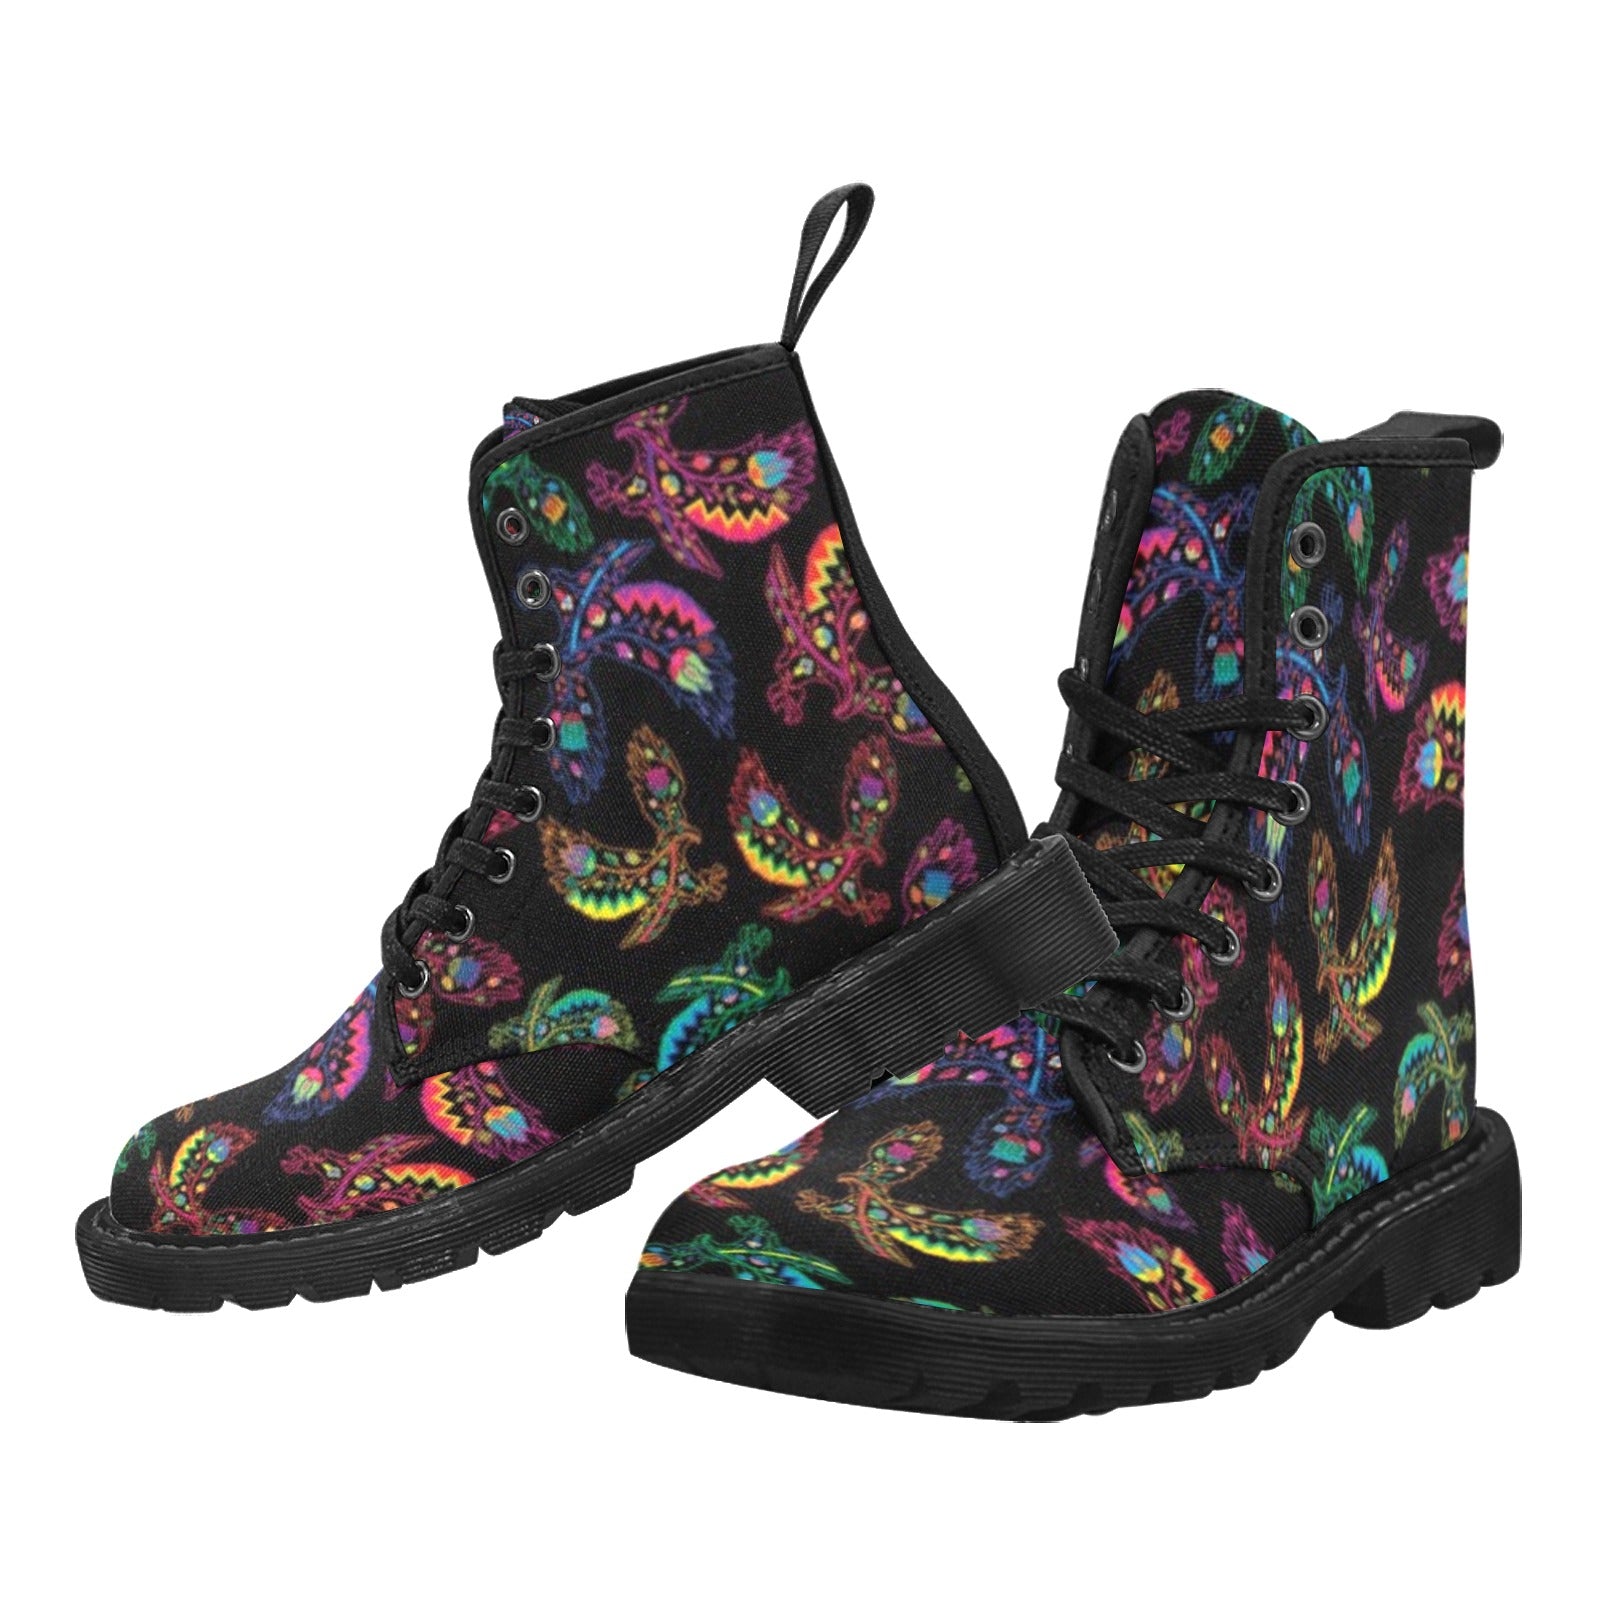 Neon Floral Eagles Boots for Women (Black)